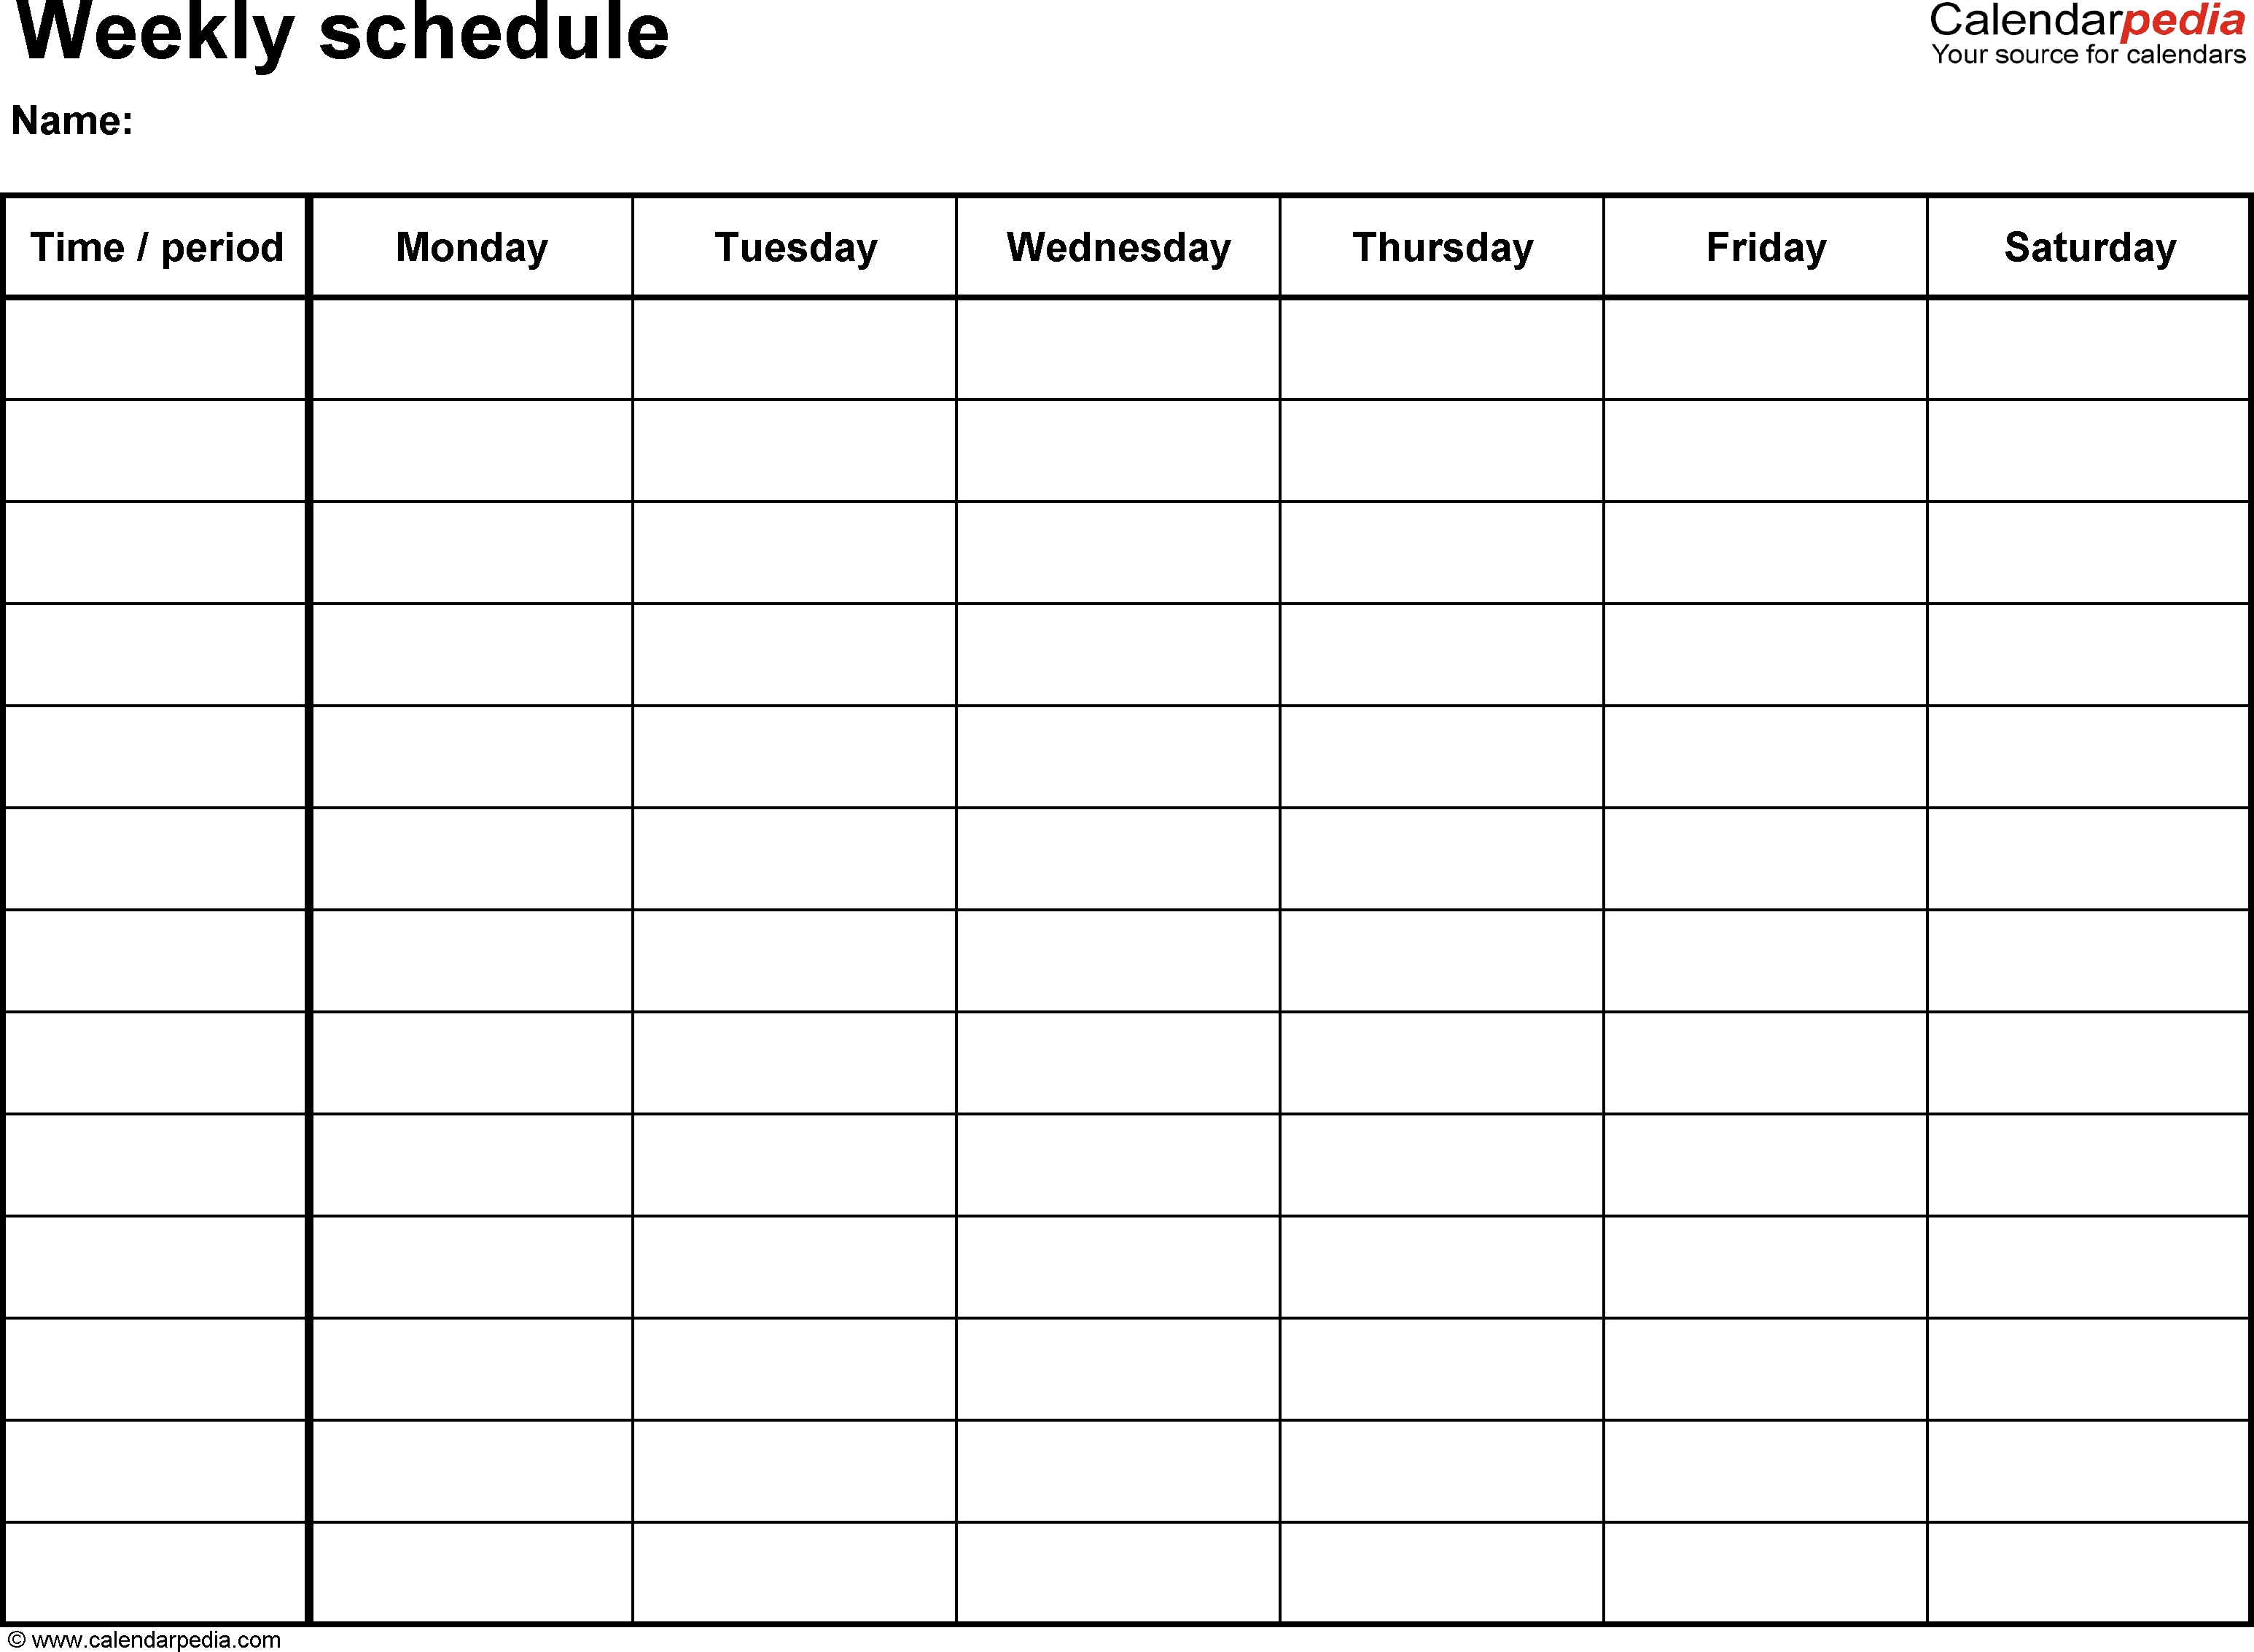 Free Weekly Schedule Templates For Word - 18 Templates-Downloadable Monday Thru Friday Calendar Template